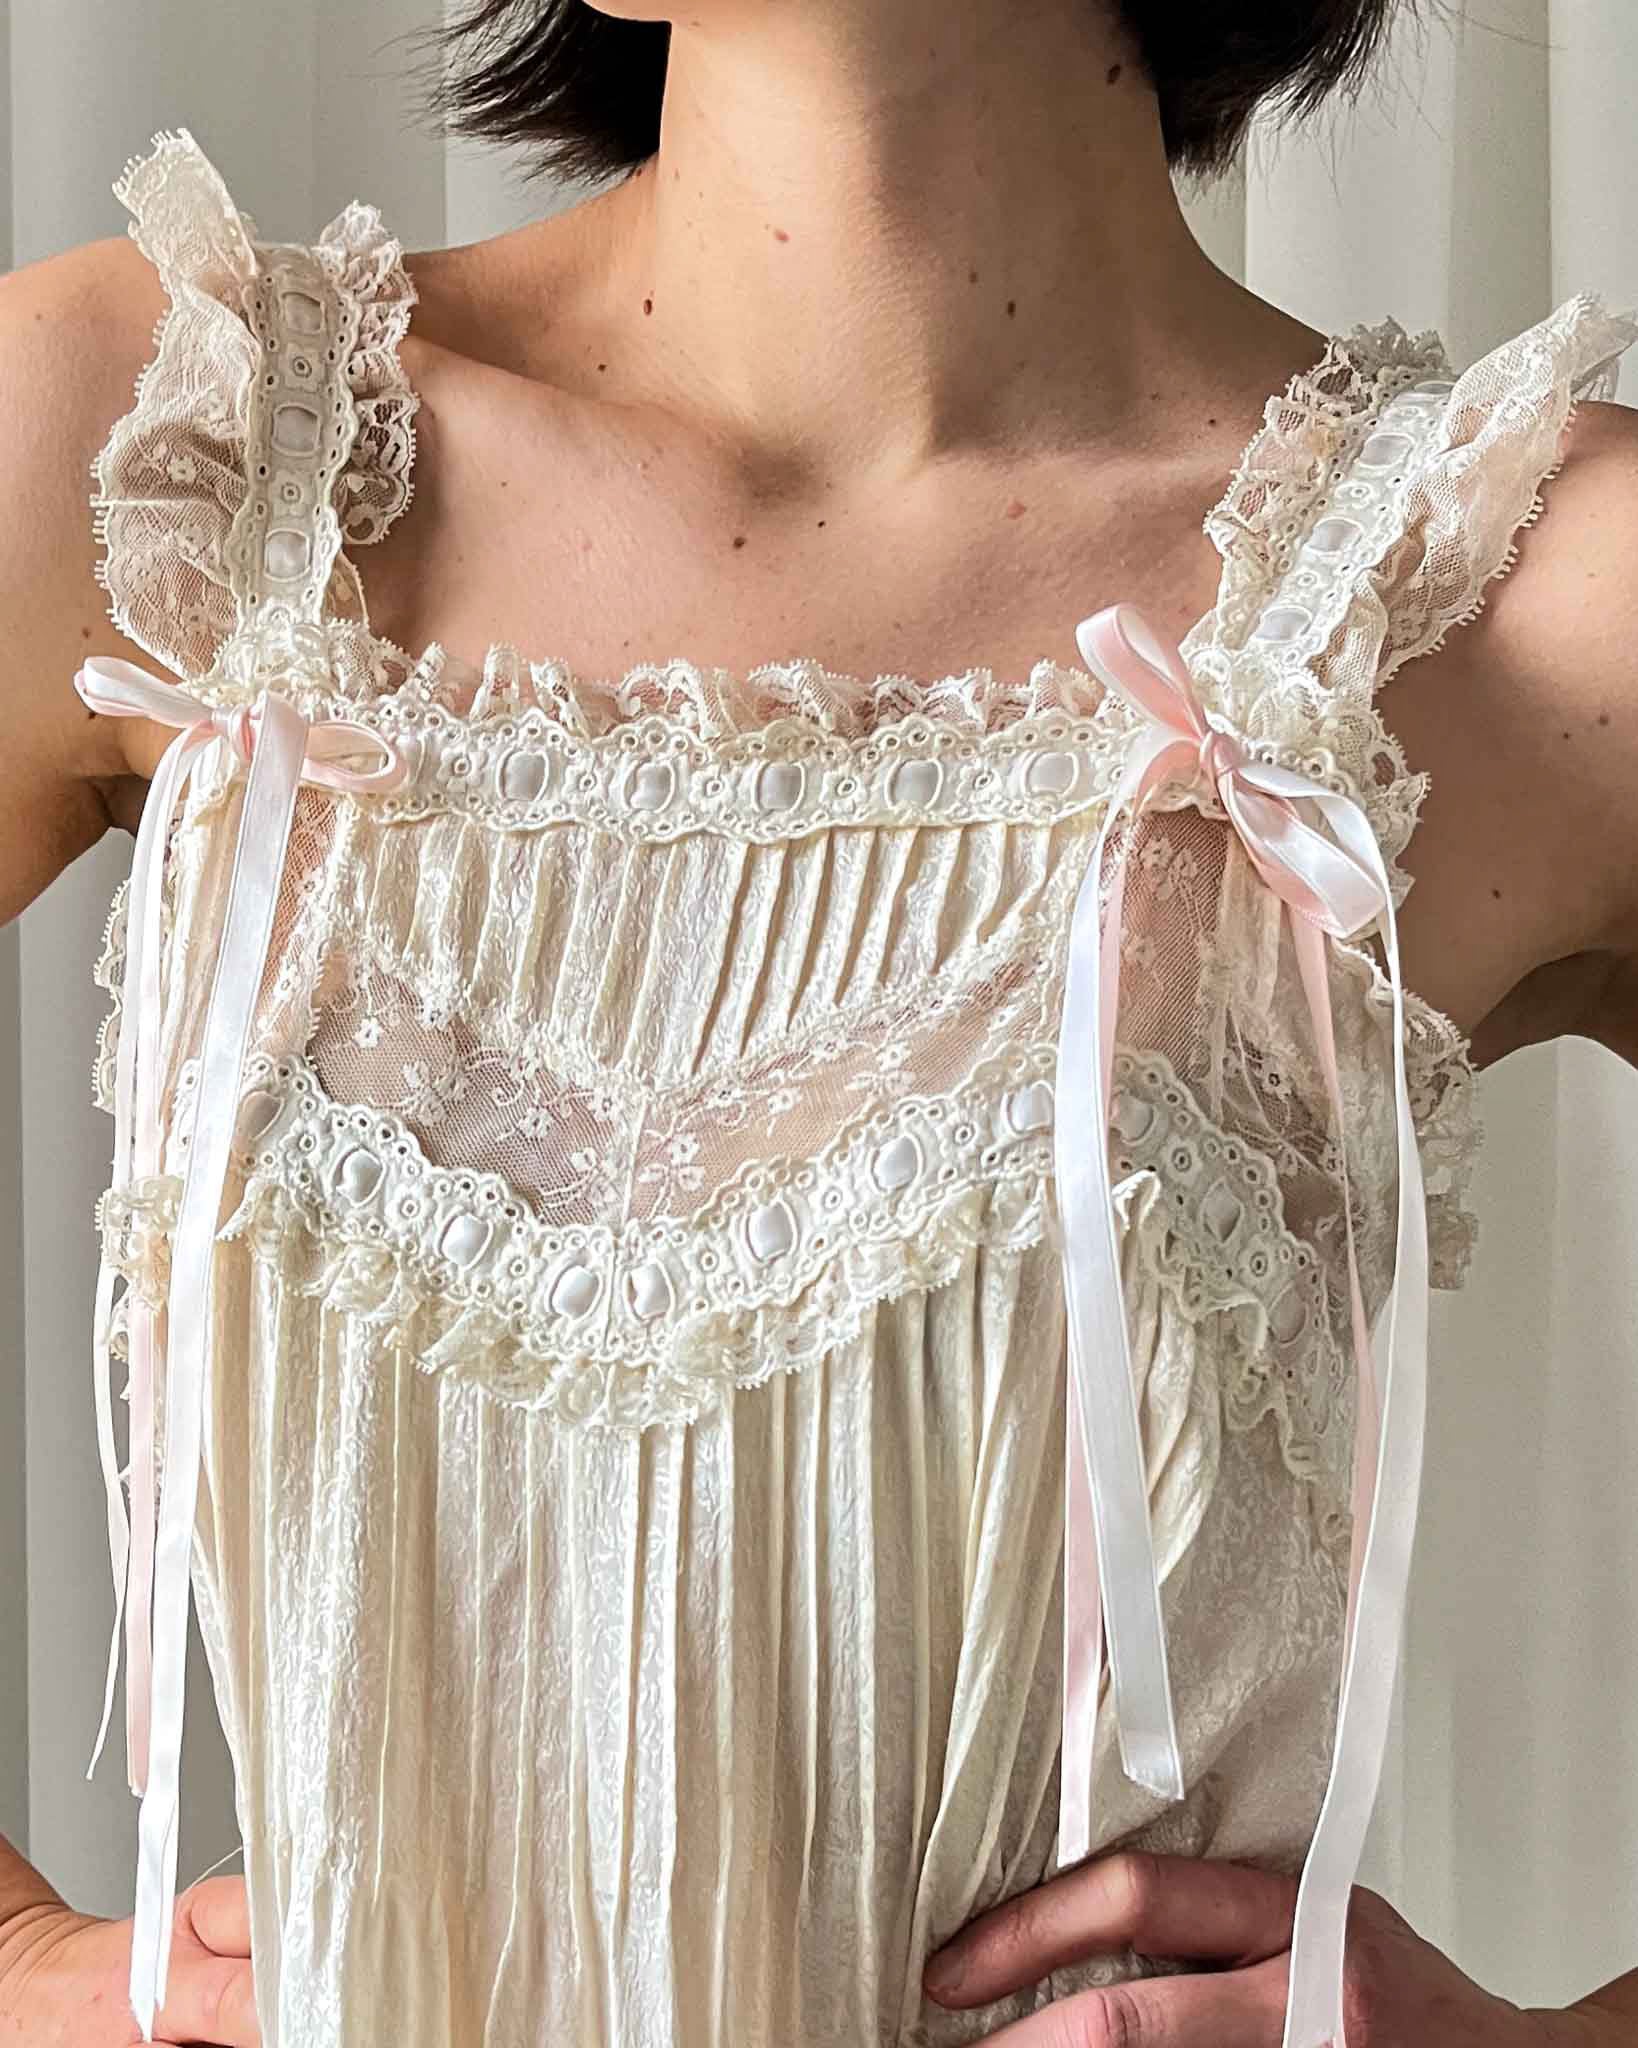 thesonagirl - Sweet silk georgette and lace bra from the 1920s, lovely,  wearable and very SONA, in a delicious rosy pink #thesonagirl #vintage  #1920s #bralette #flealondon #salusburysundaymarket #oneofakind